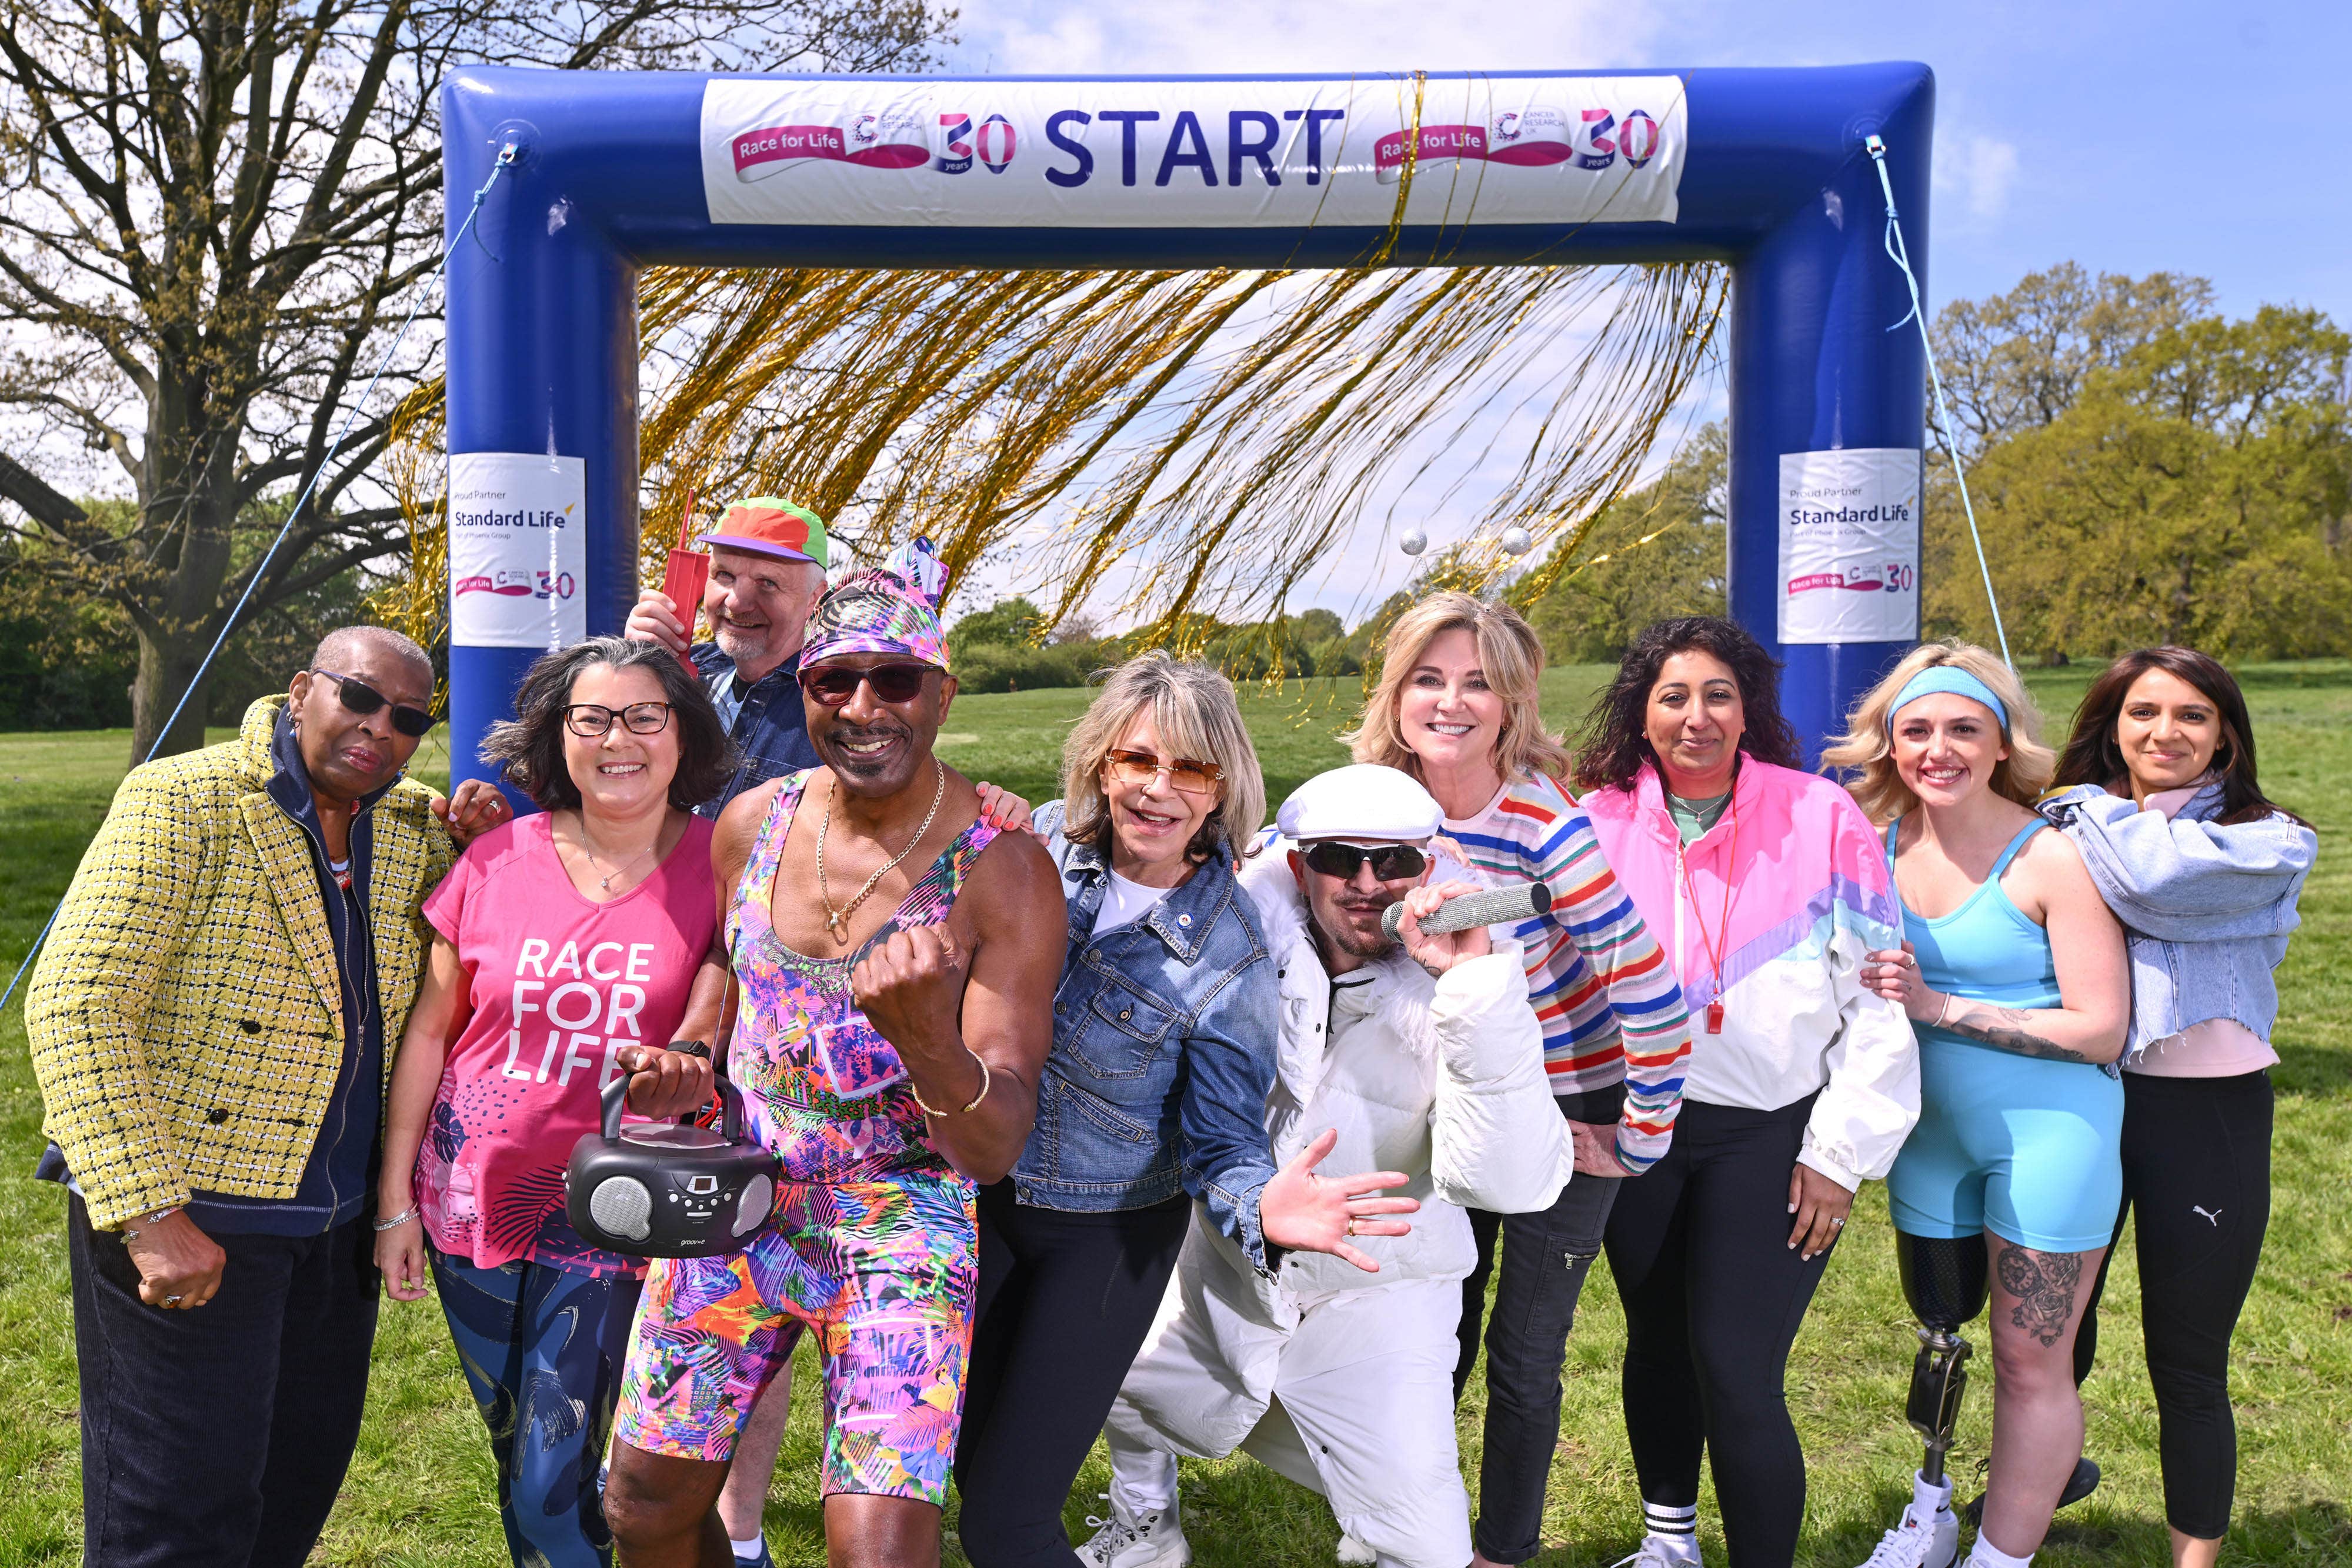 Chantelle Cox, second from right, with celebrities including Mr Motivator, Anthea Turner, Leslie Ash and Terry Coldwell (Matt Crossick/PA)